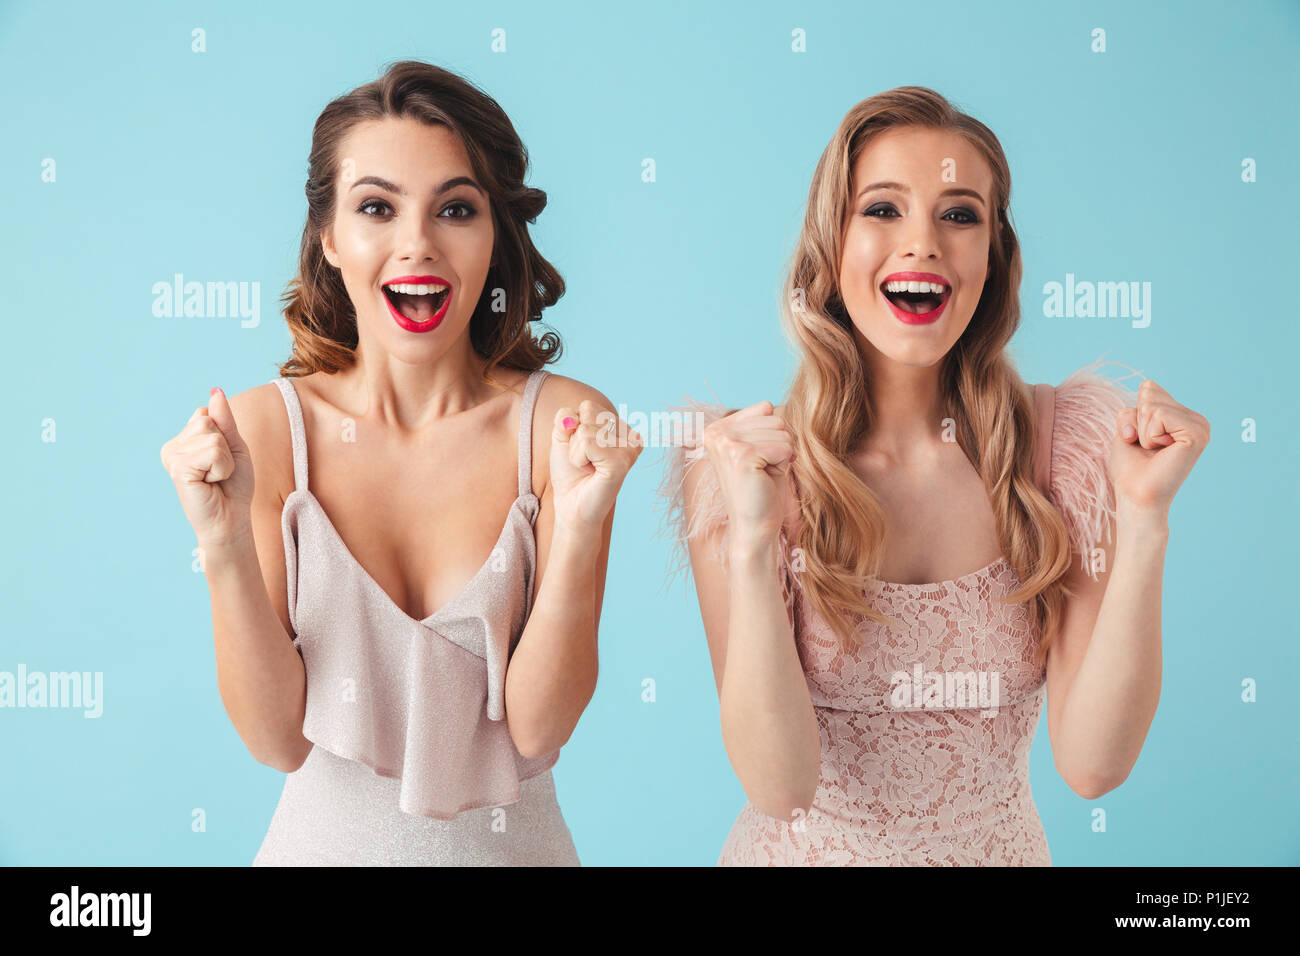 Two Surprised happy women in dresses screaming and rejoices while looking at the camera over turquoise background Stock Photo